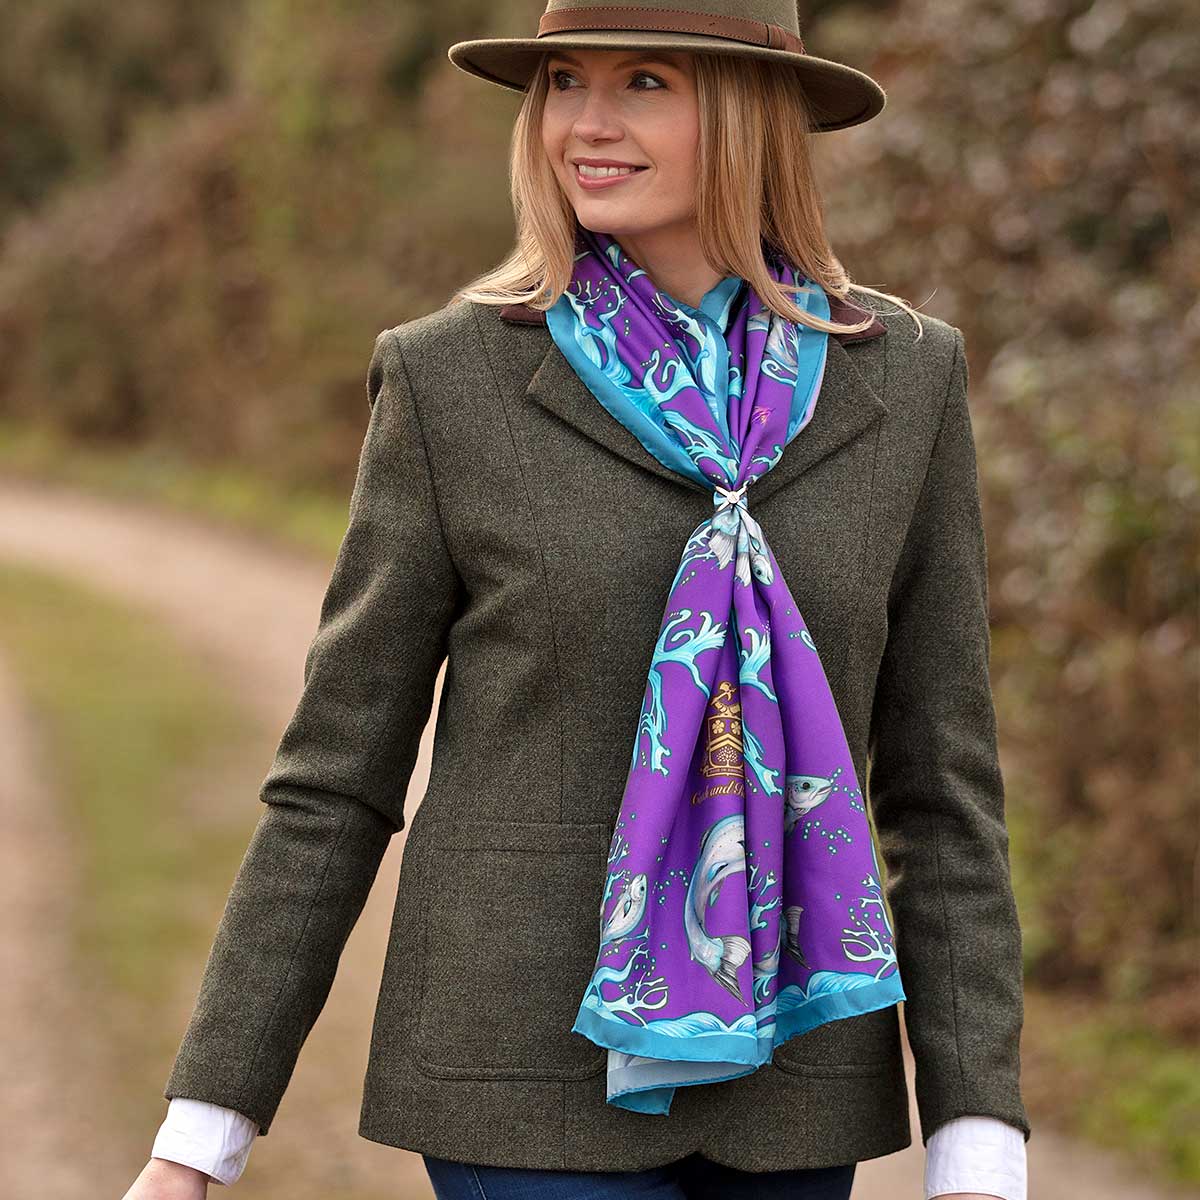 The Tied Drape with Scarf Ring, the best way to tie a classic or rectangluar silk scarf.